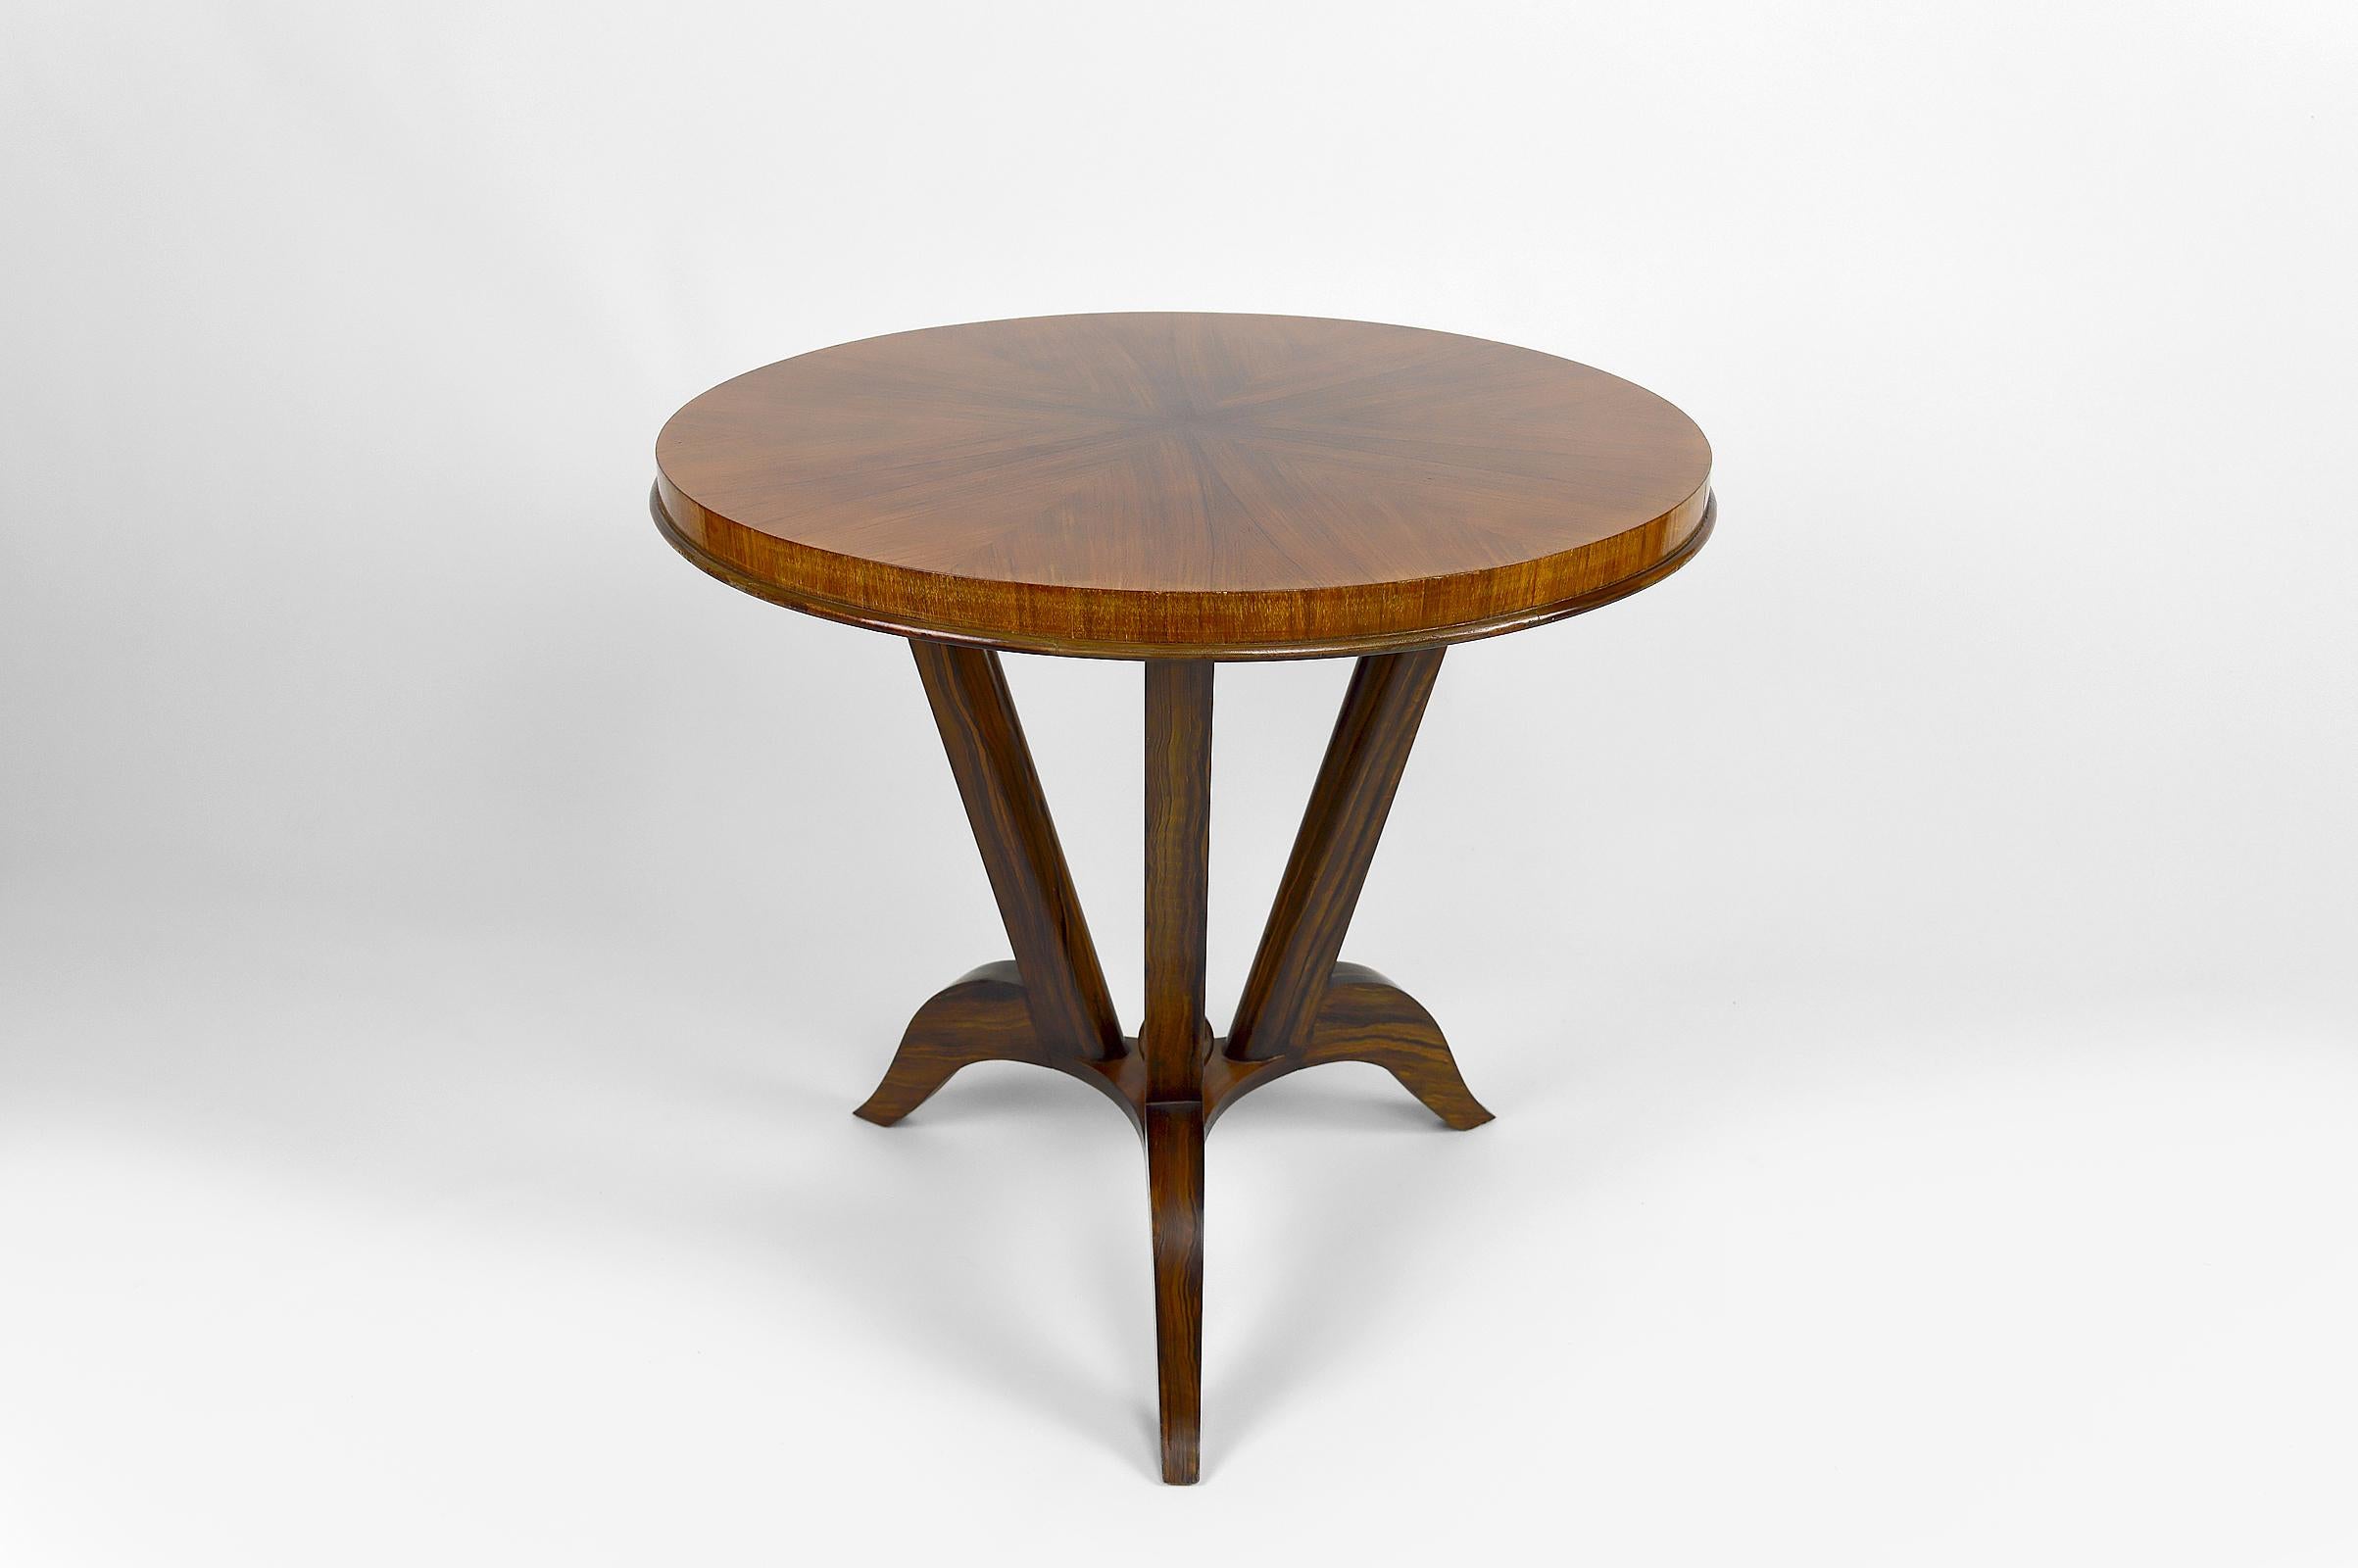 Gueridon / coffee / side table composed of a beautiful round top in walnut, and a tripod base with trompe-l'oeil painting imitating Macassar ebony (superb work of a 